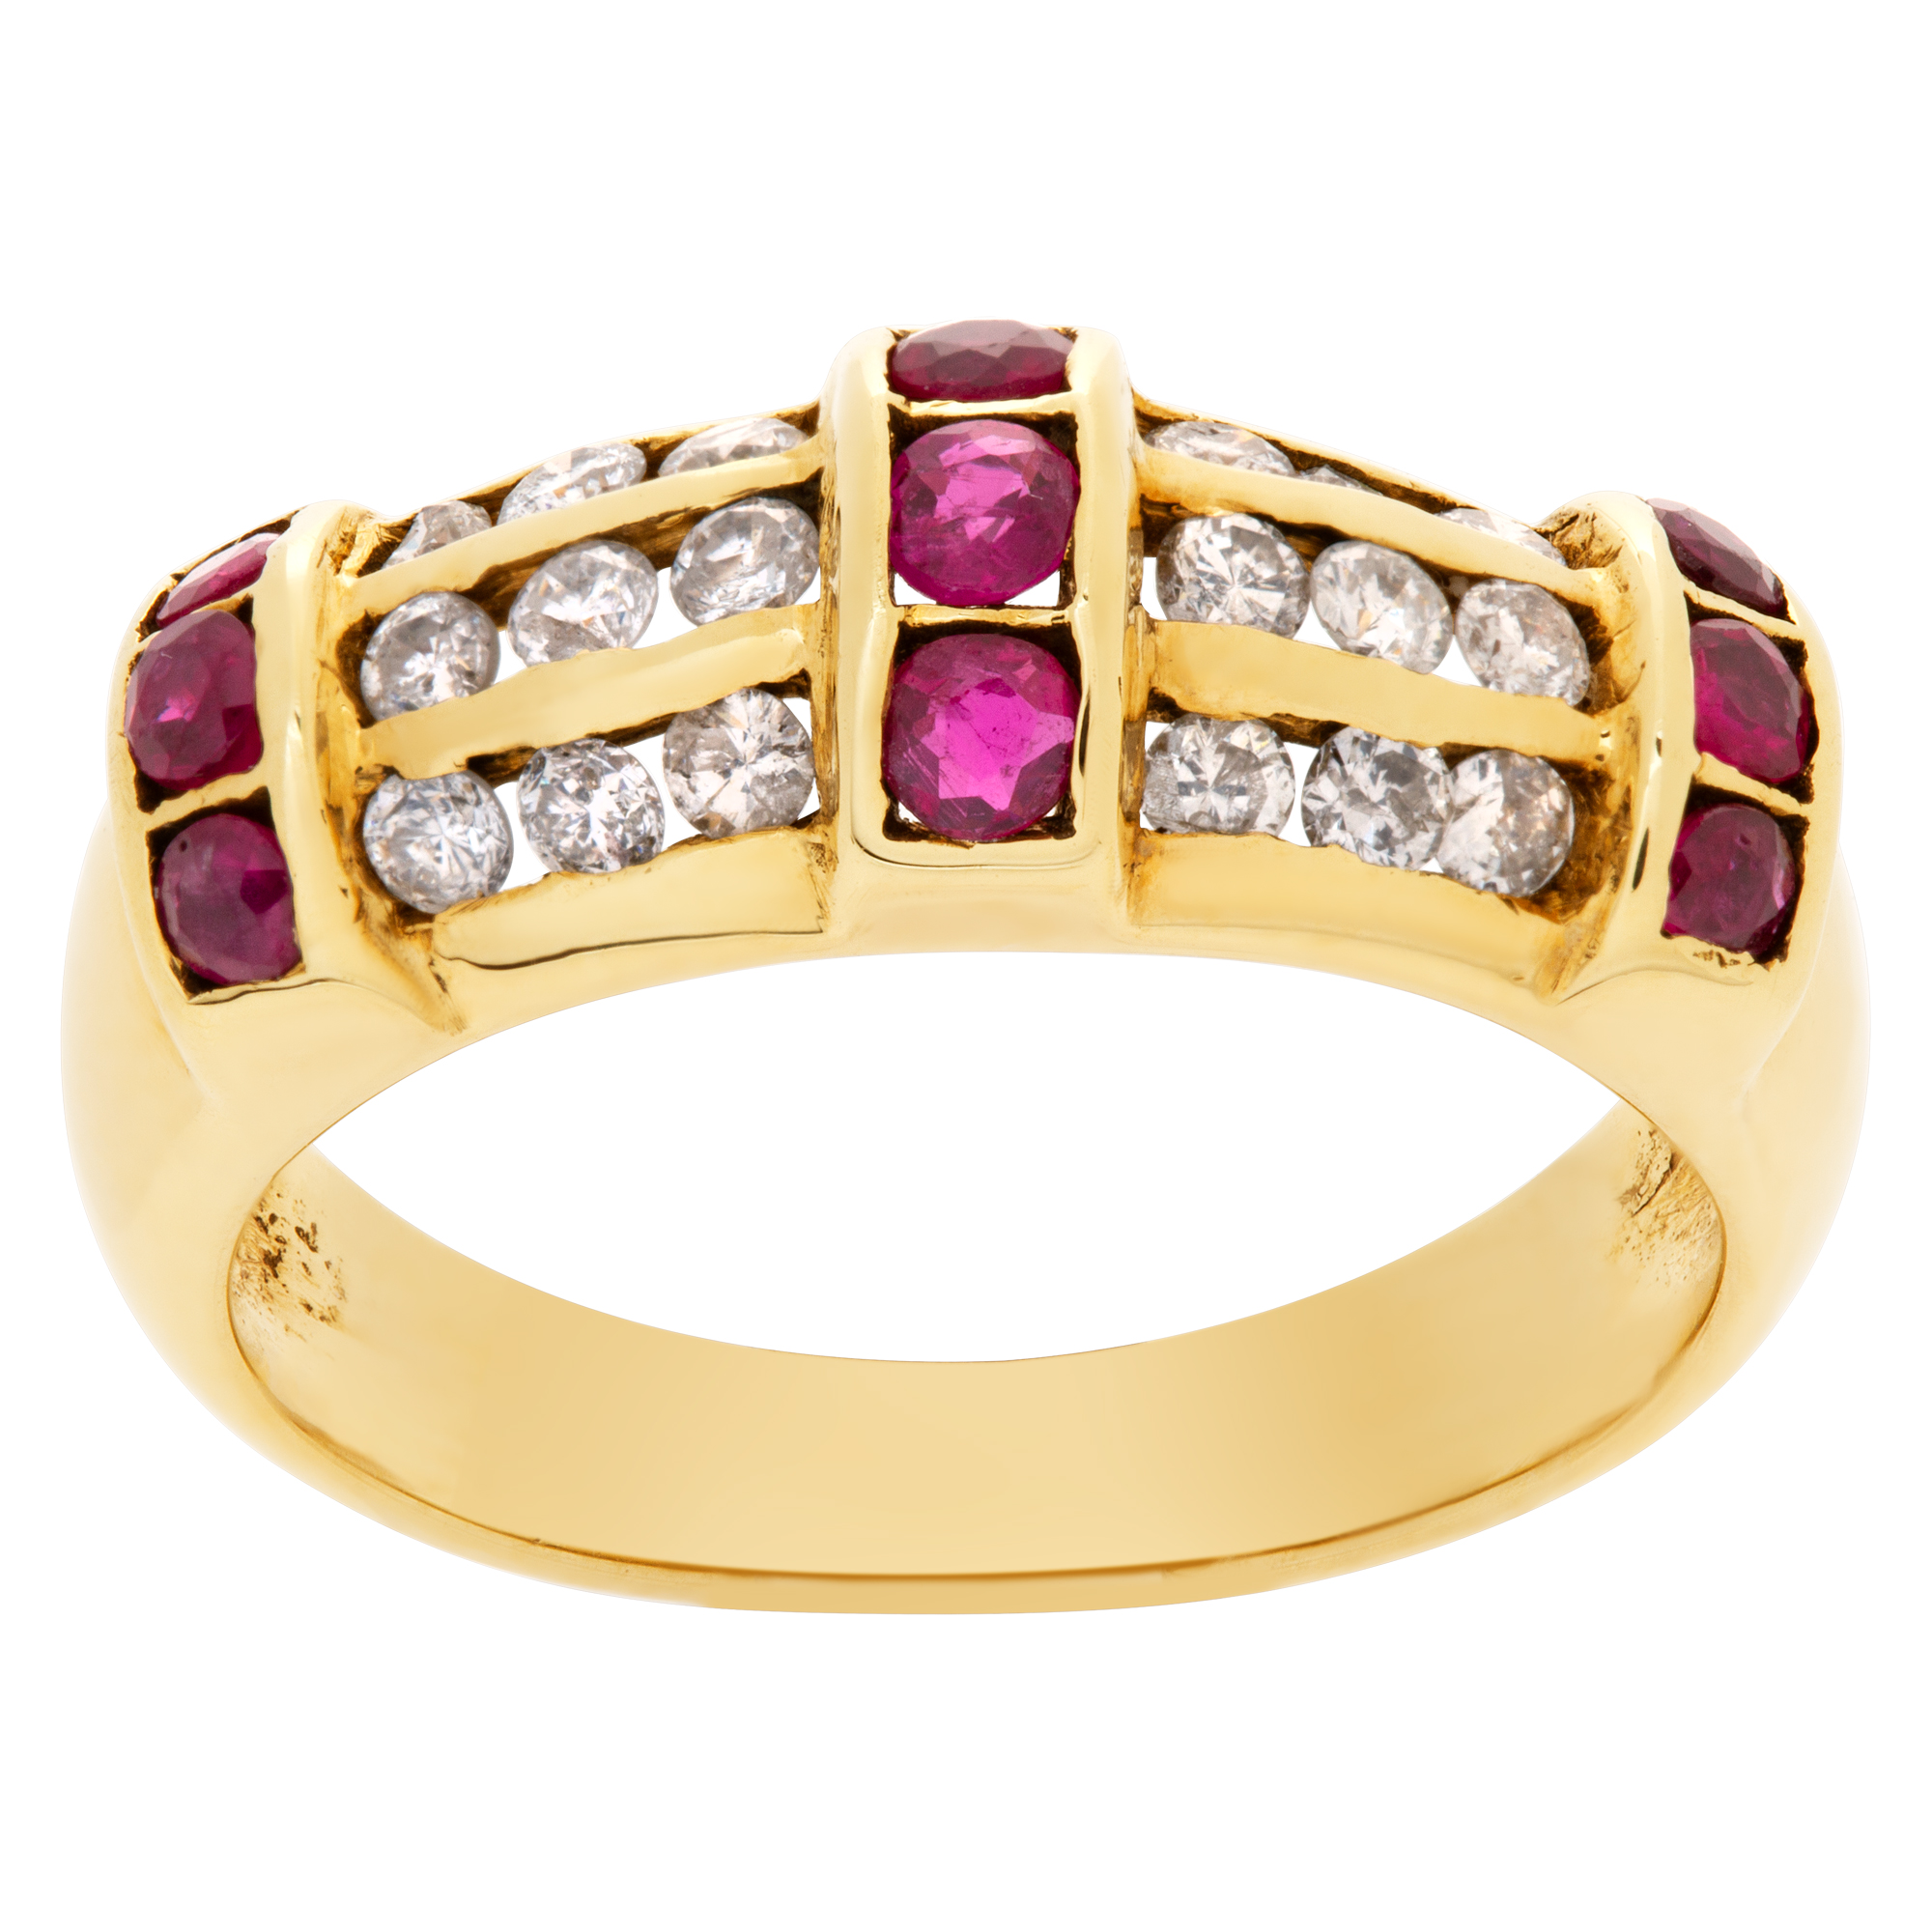 Lovely ruby and diamonds ring in 14k yellow gold. Size 5.5